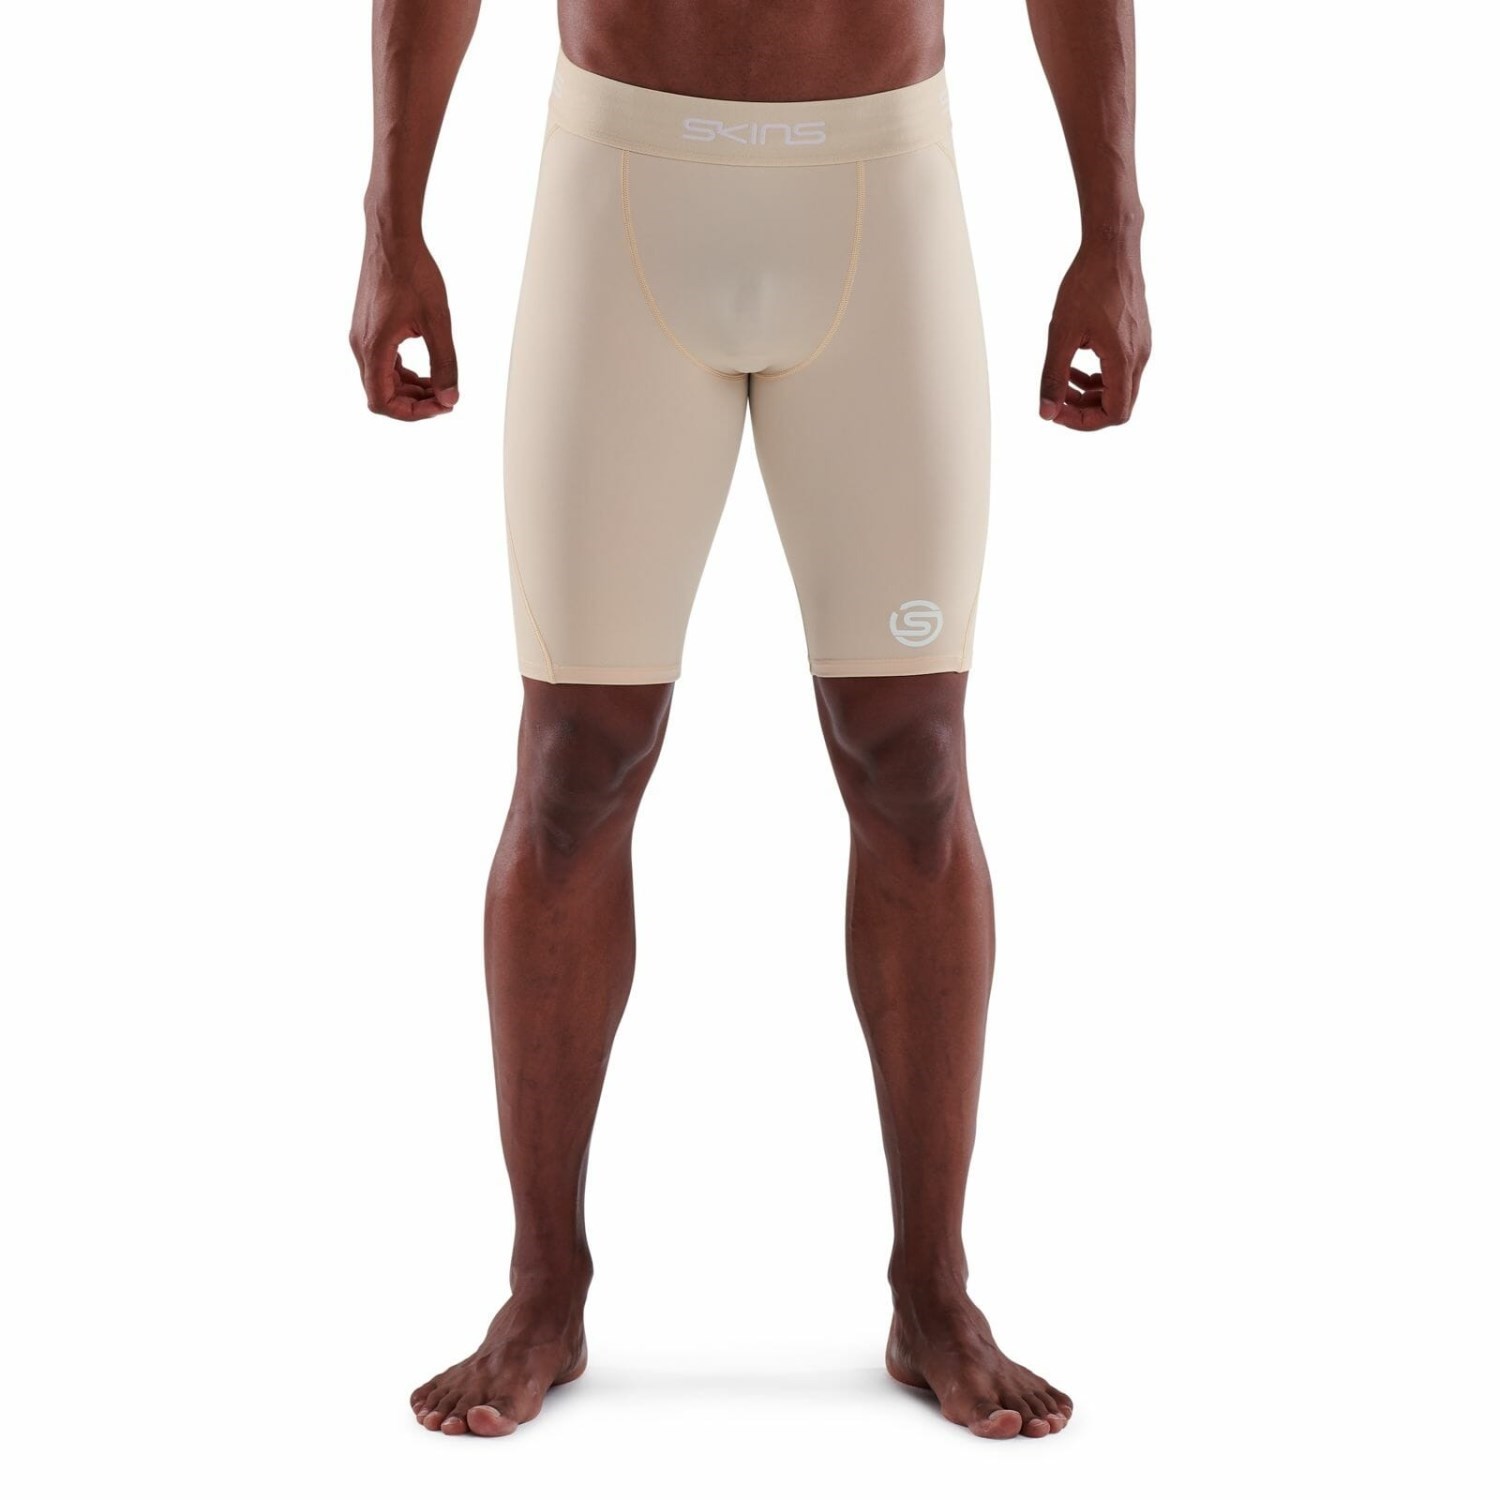 Skins compression vs 2XU compression gear review - best workout